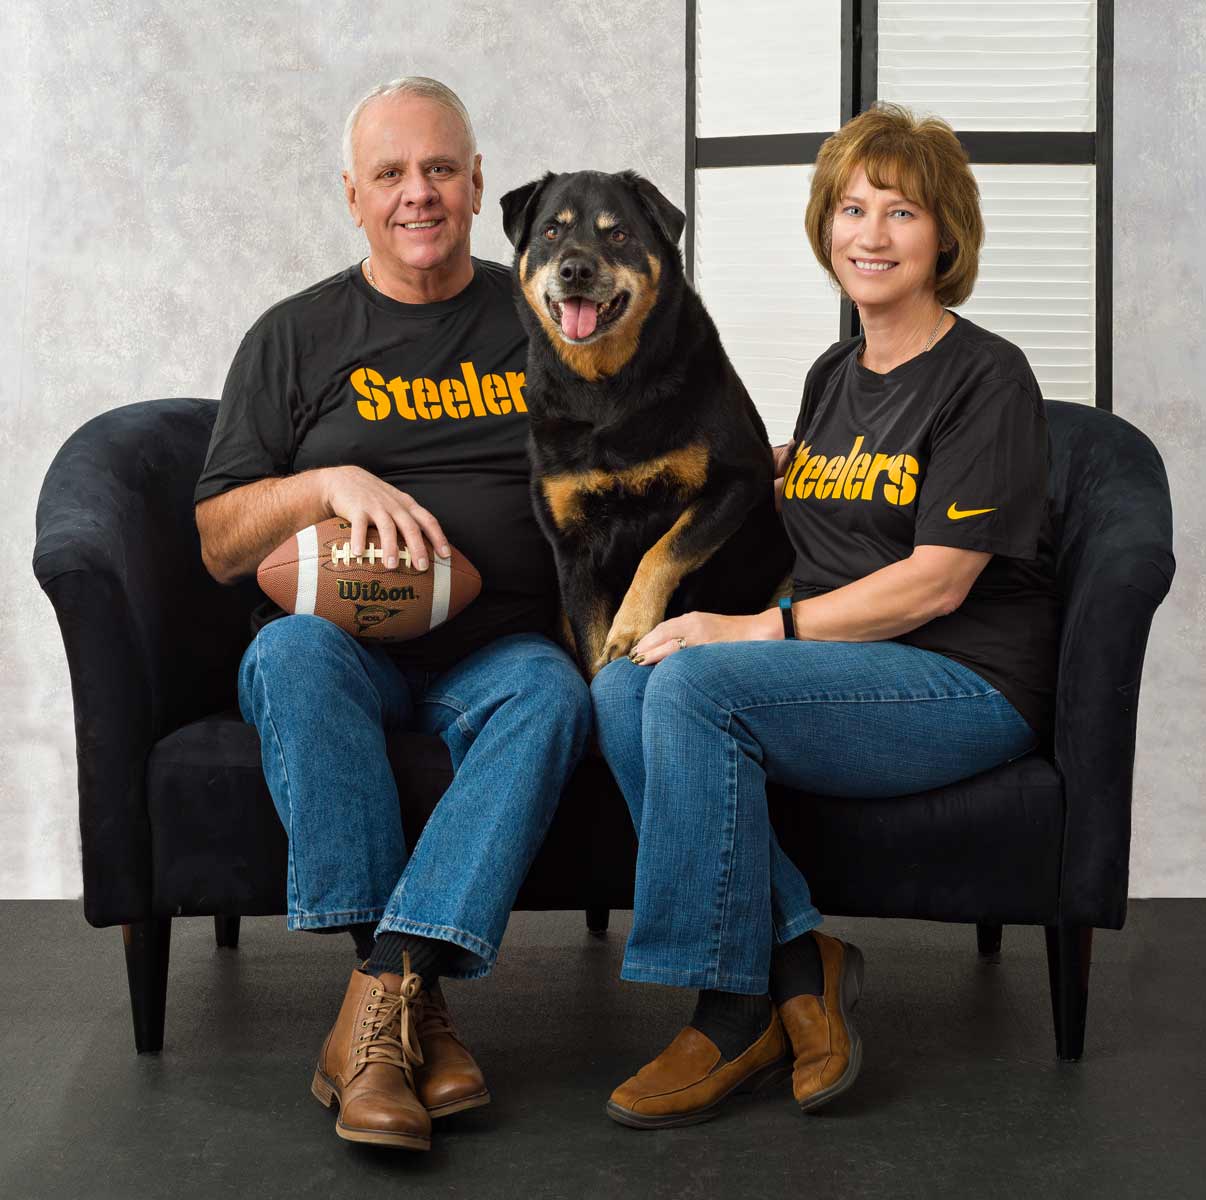 A man and woman sitting on a couch with their dog.